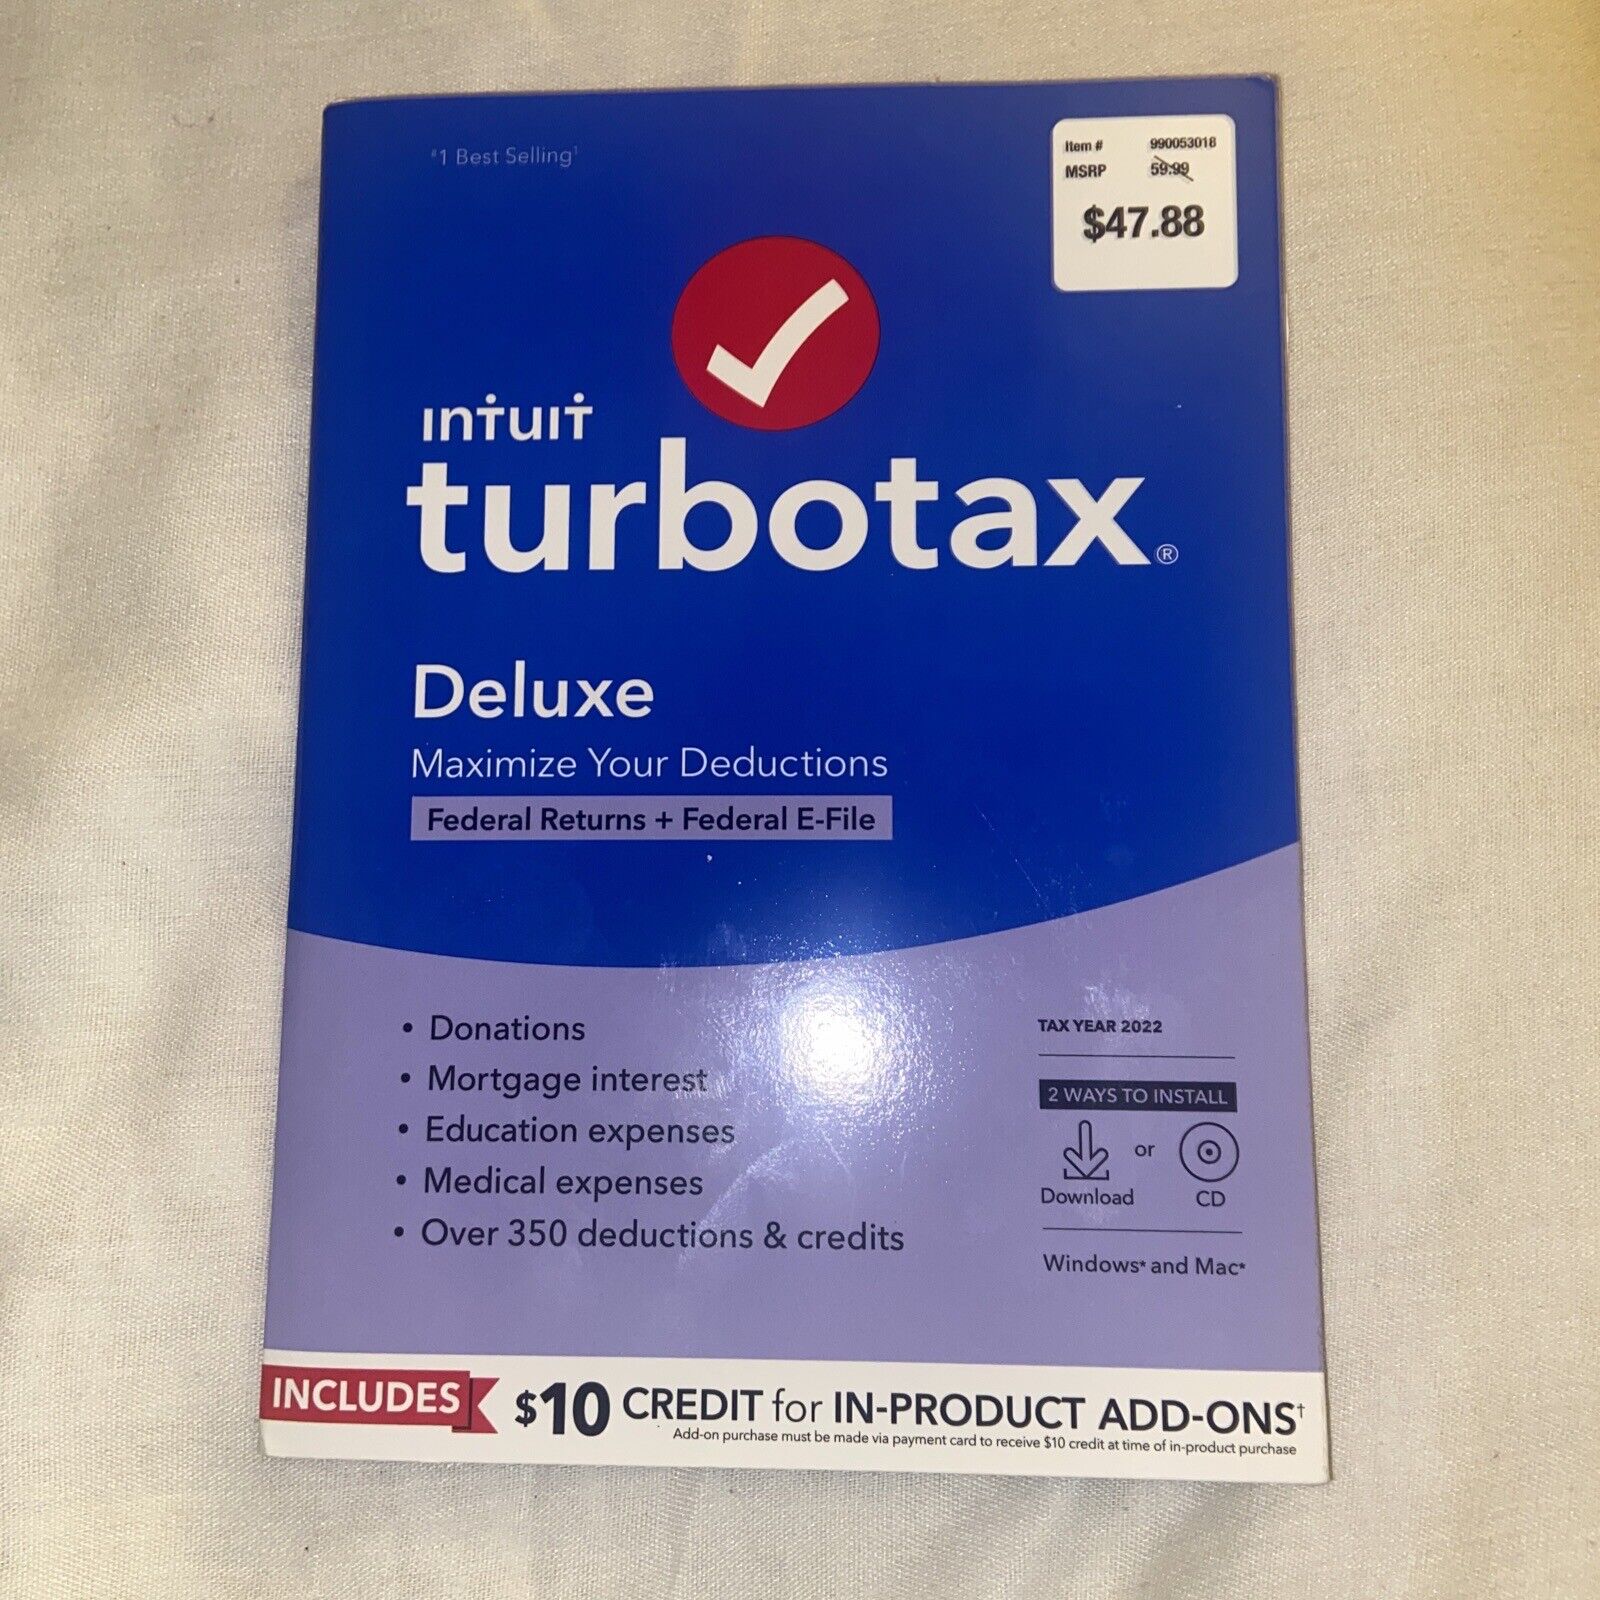 Intuit TurboTax Deluxe CD or Download Federal Returns & E-File, Tax Year 2022